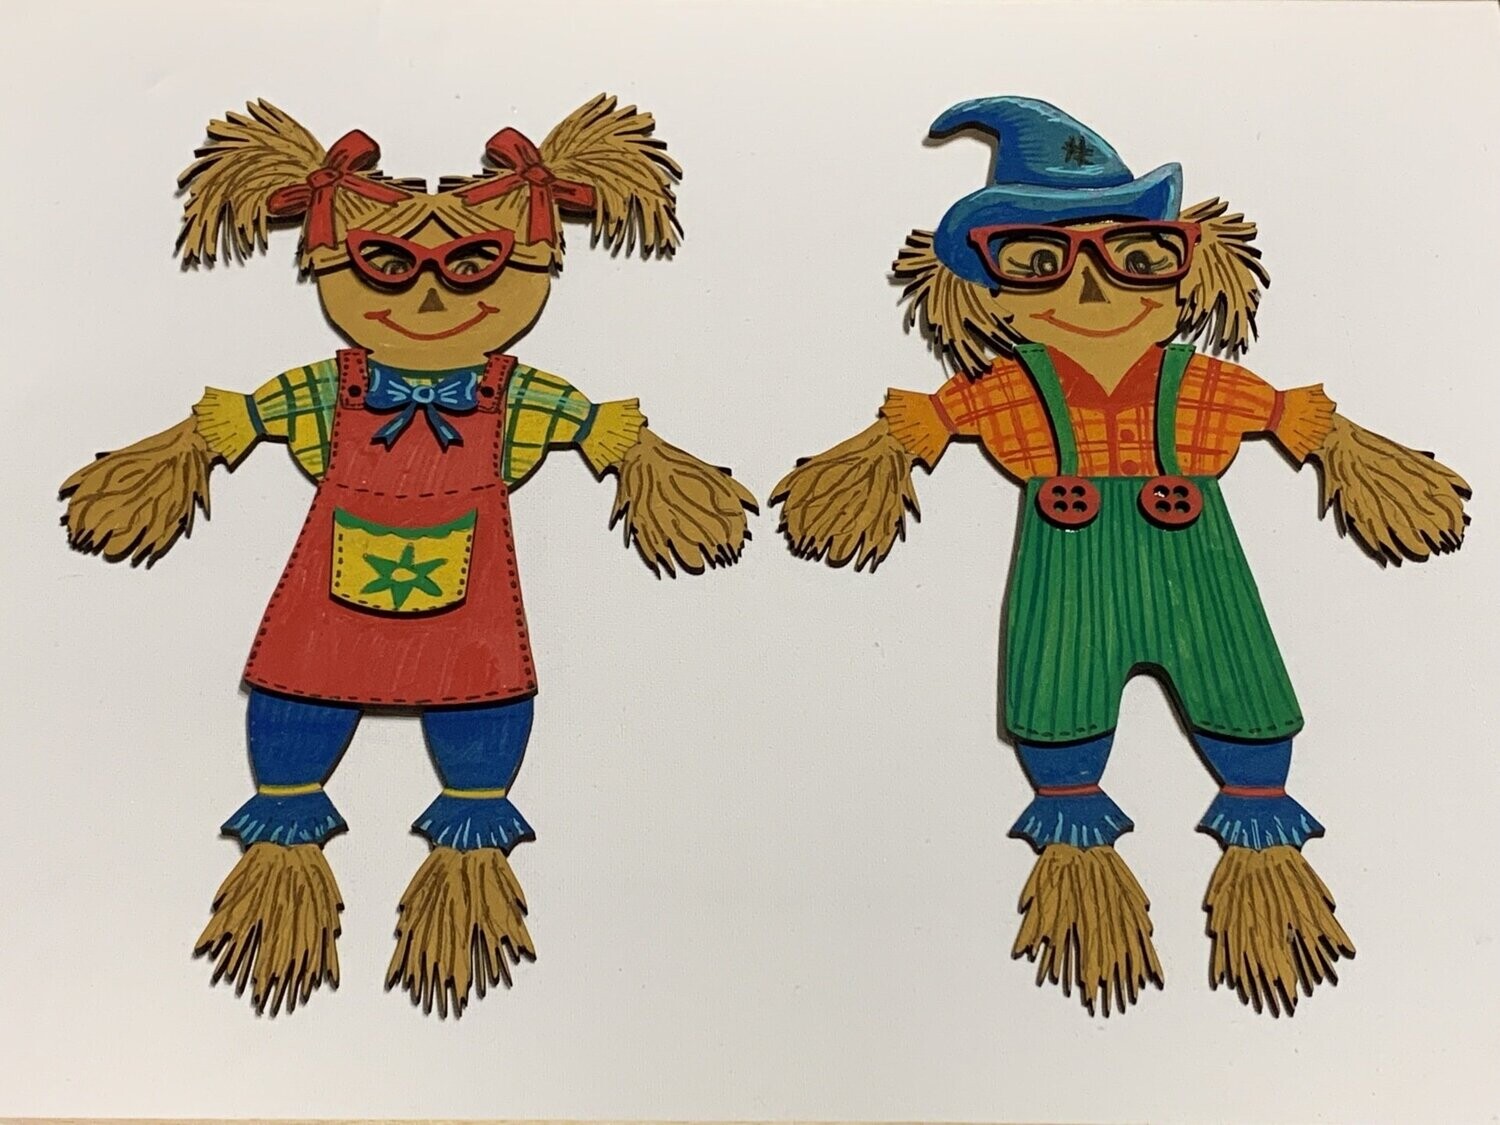 DIY Scarecrow People (complete With Pen Or Paints), Scarecrow Style: Both designs